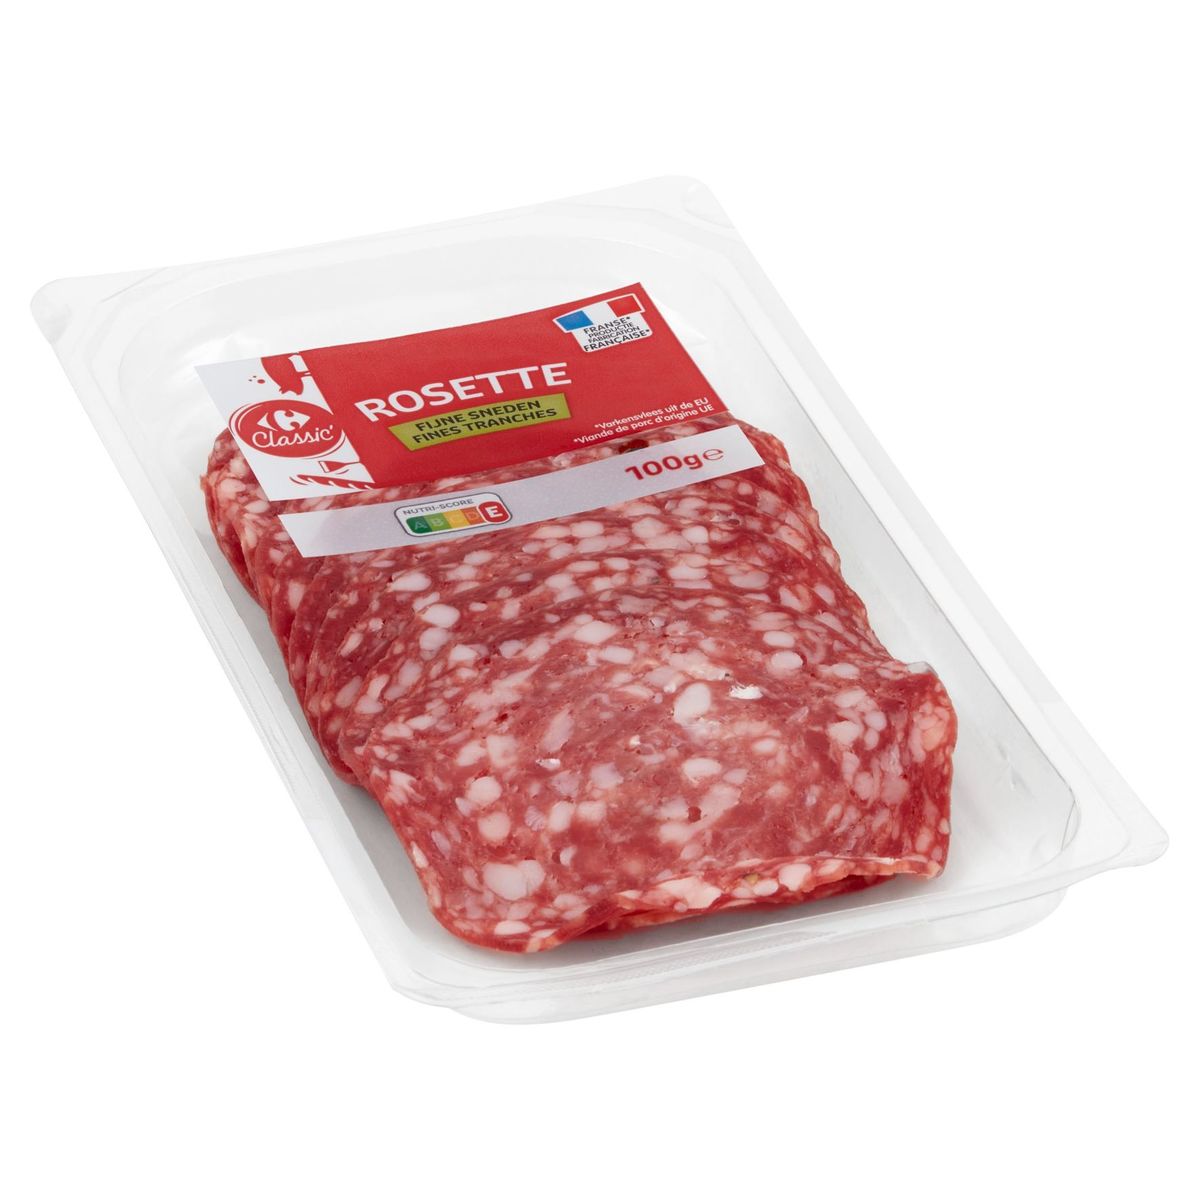 Carrefour Classic' Rosette Fines Tranches 100 g